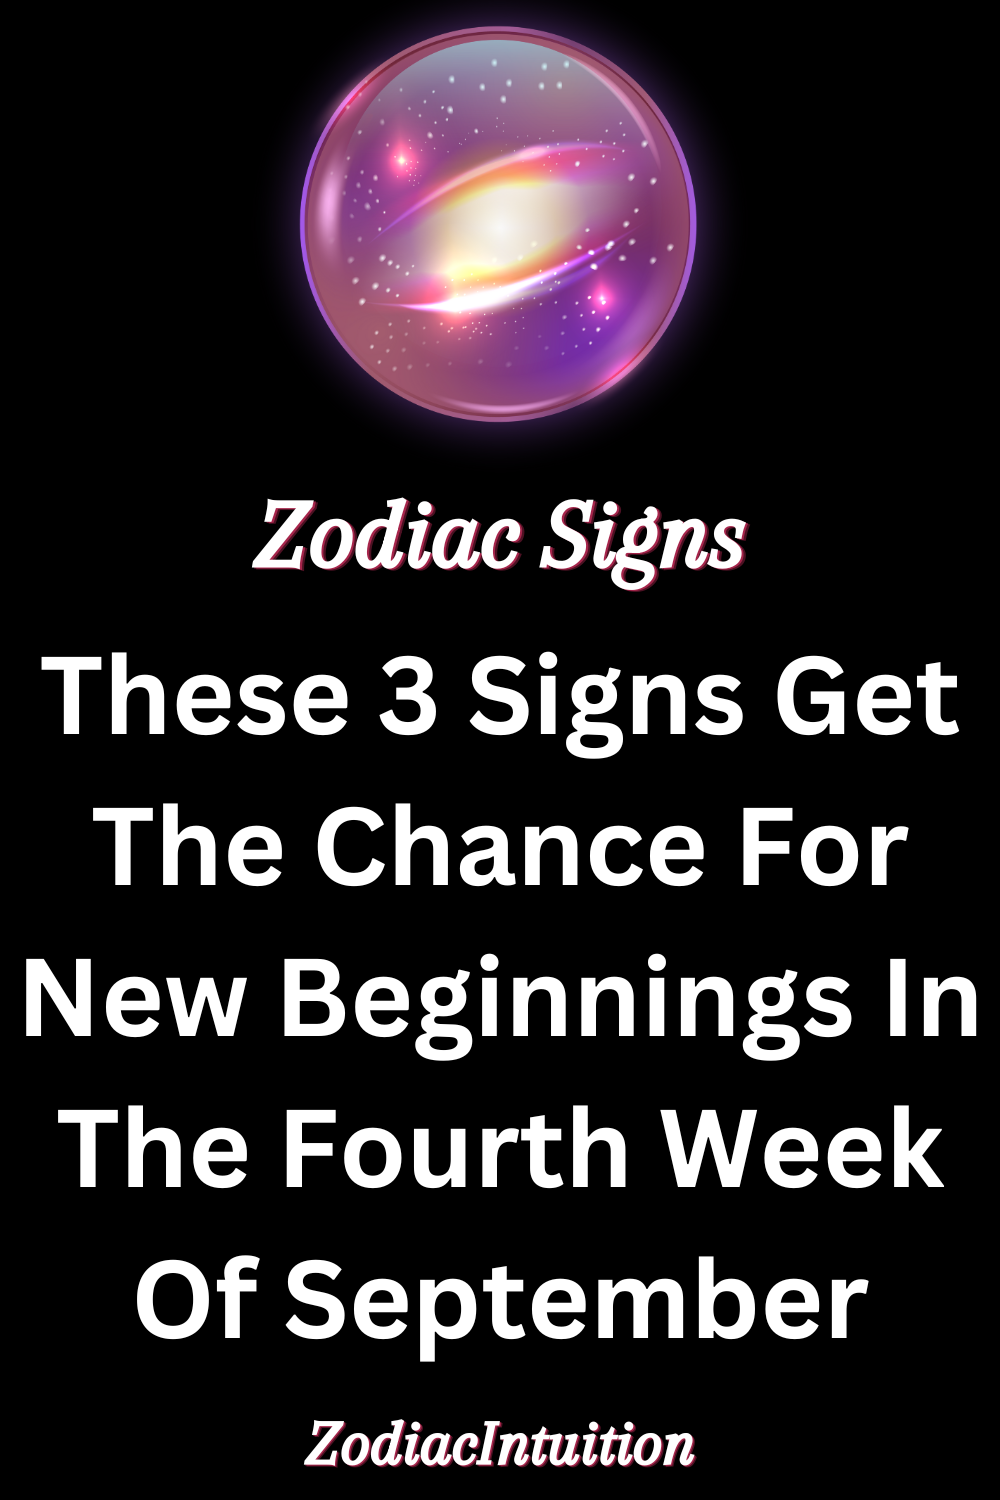 These 3 Signs Get The Chance For New Beginnings In The Fourth Week Of September